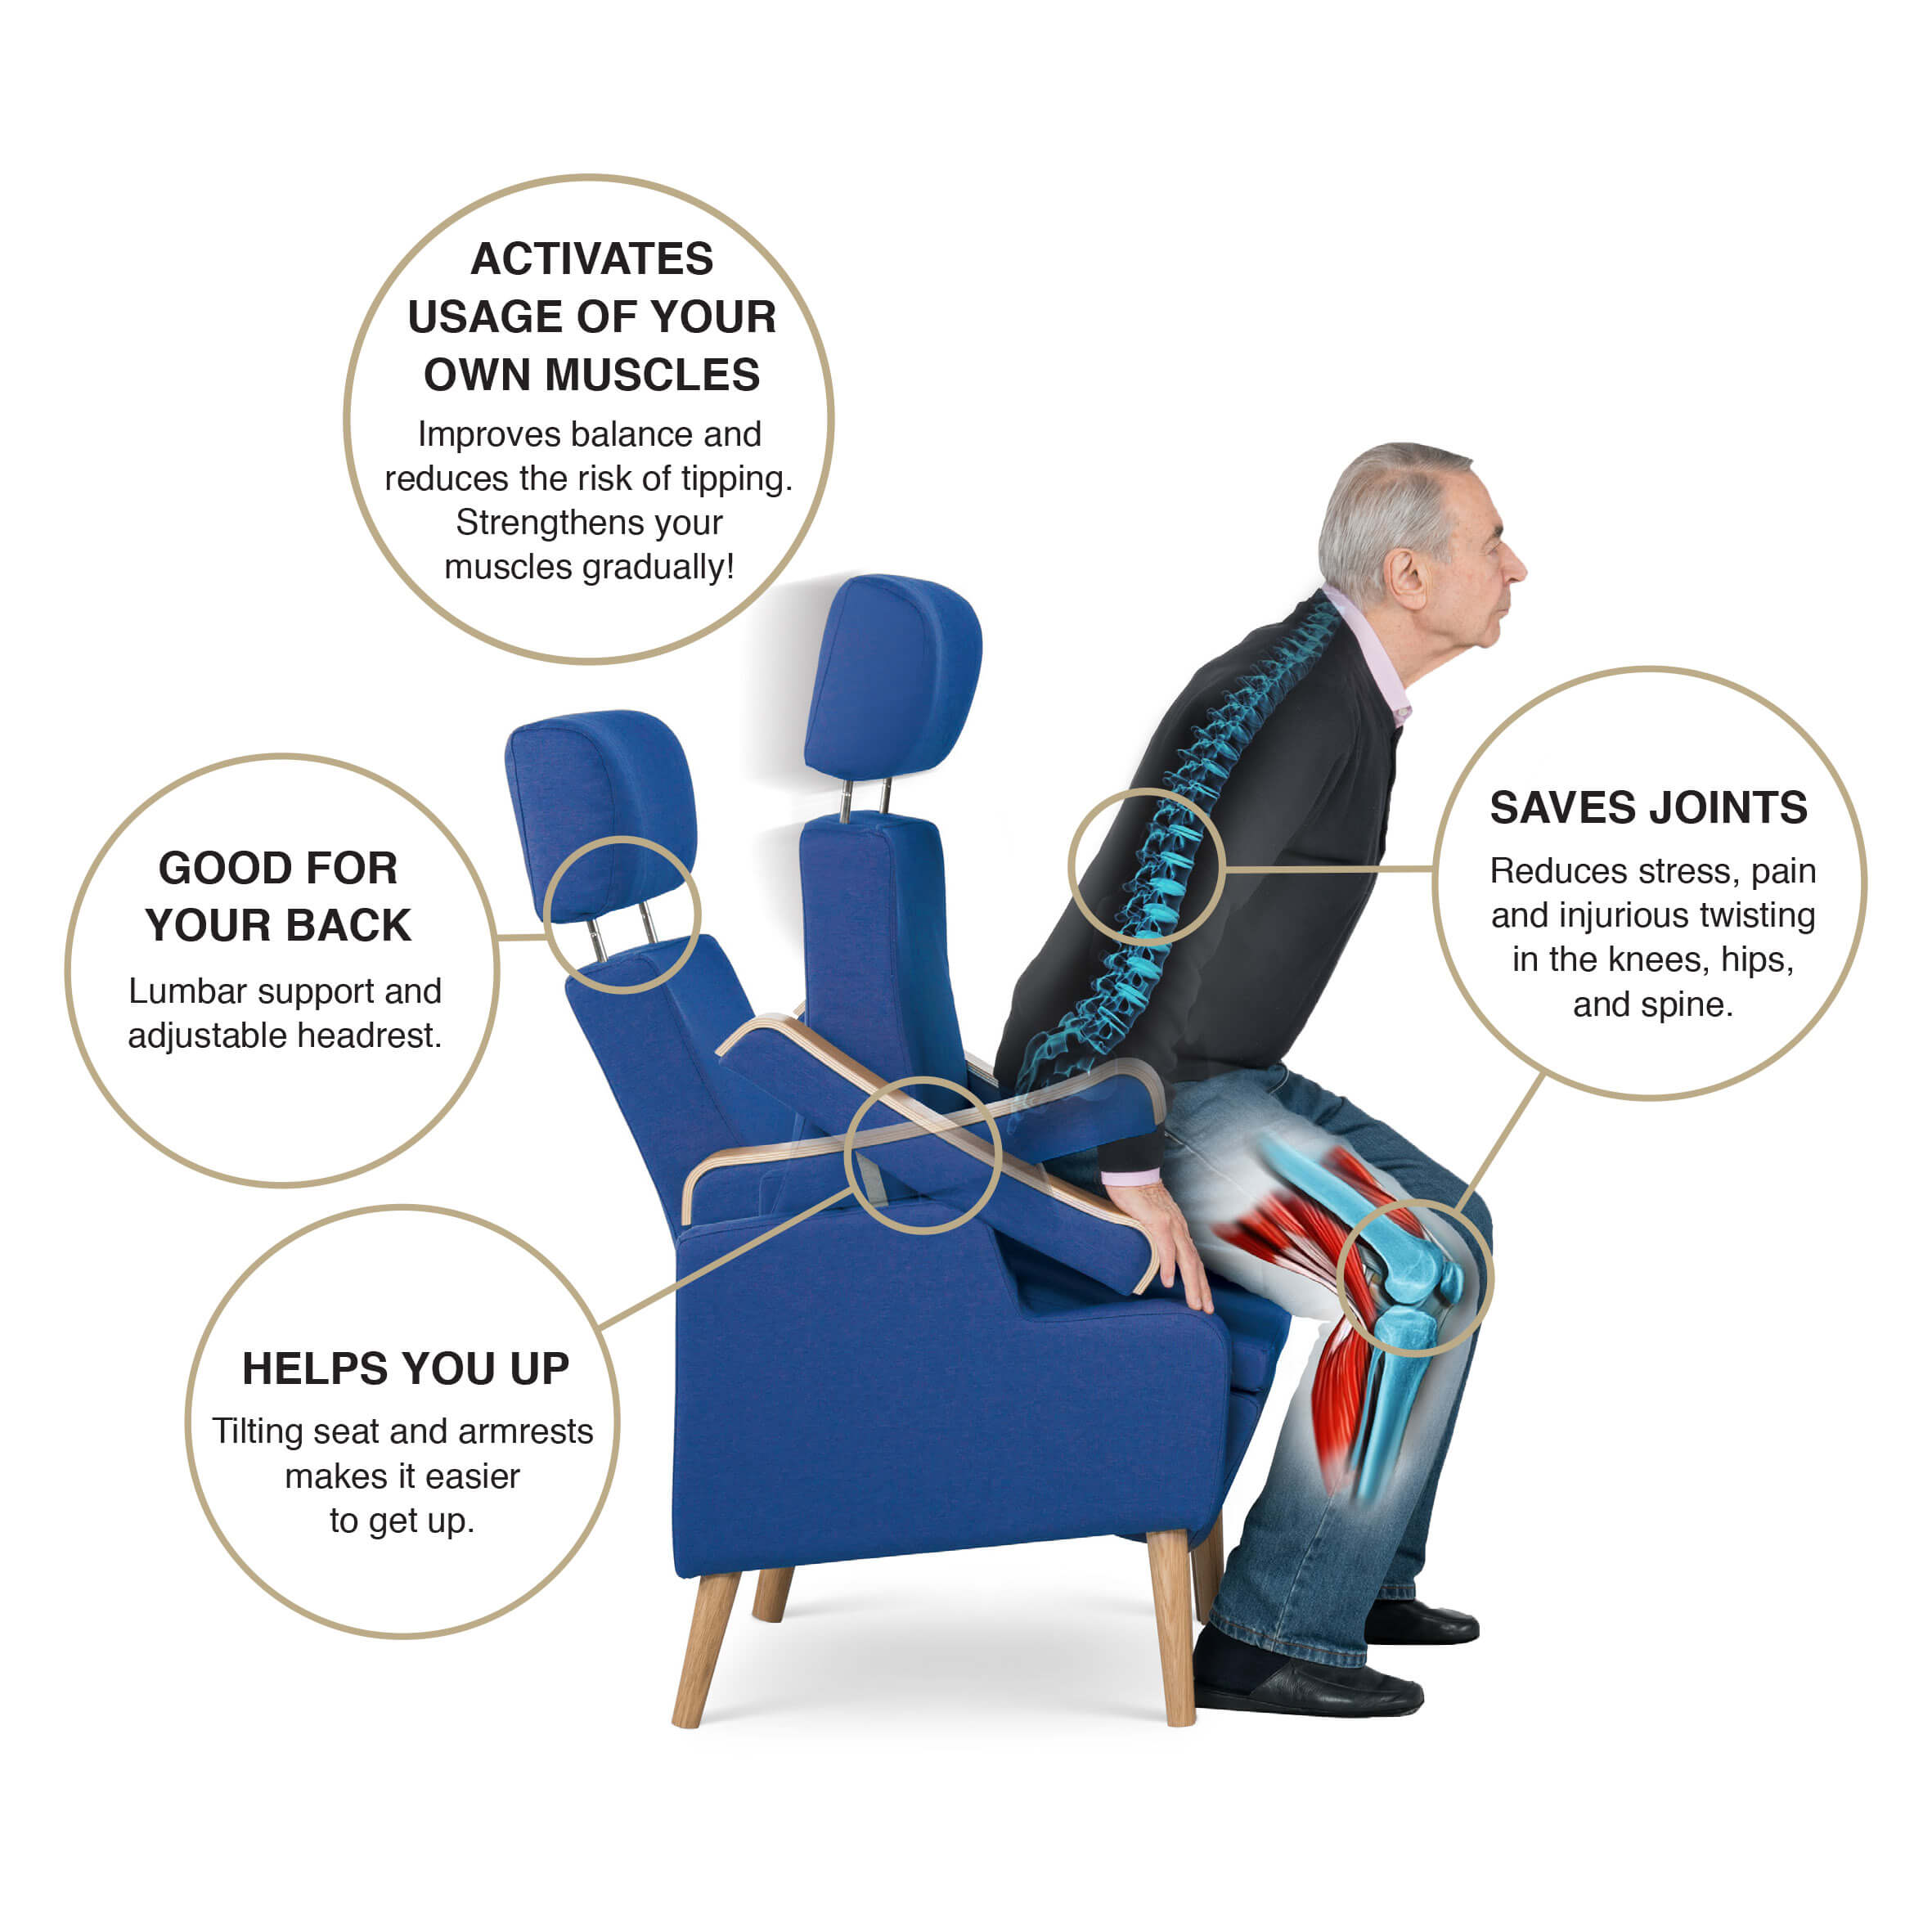 Featured image for “Armi Activechair helps you up and keeps you in shape”